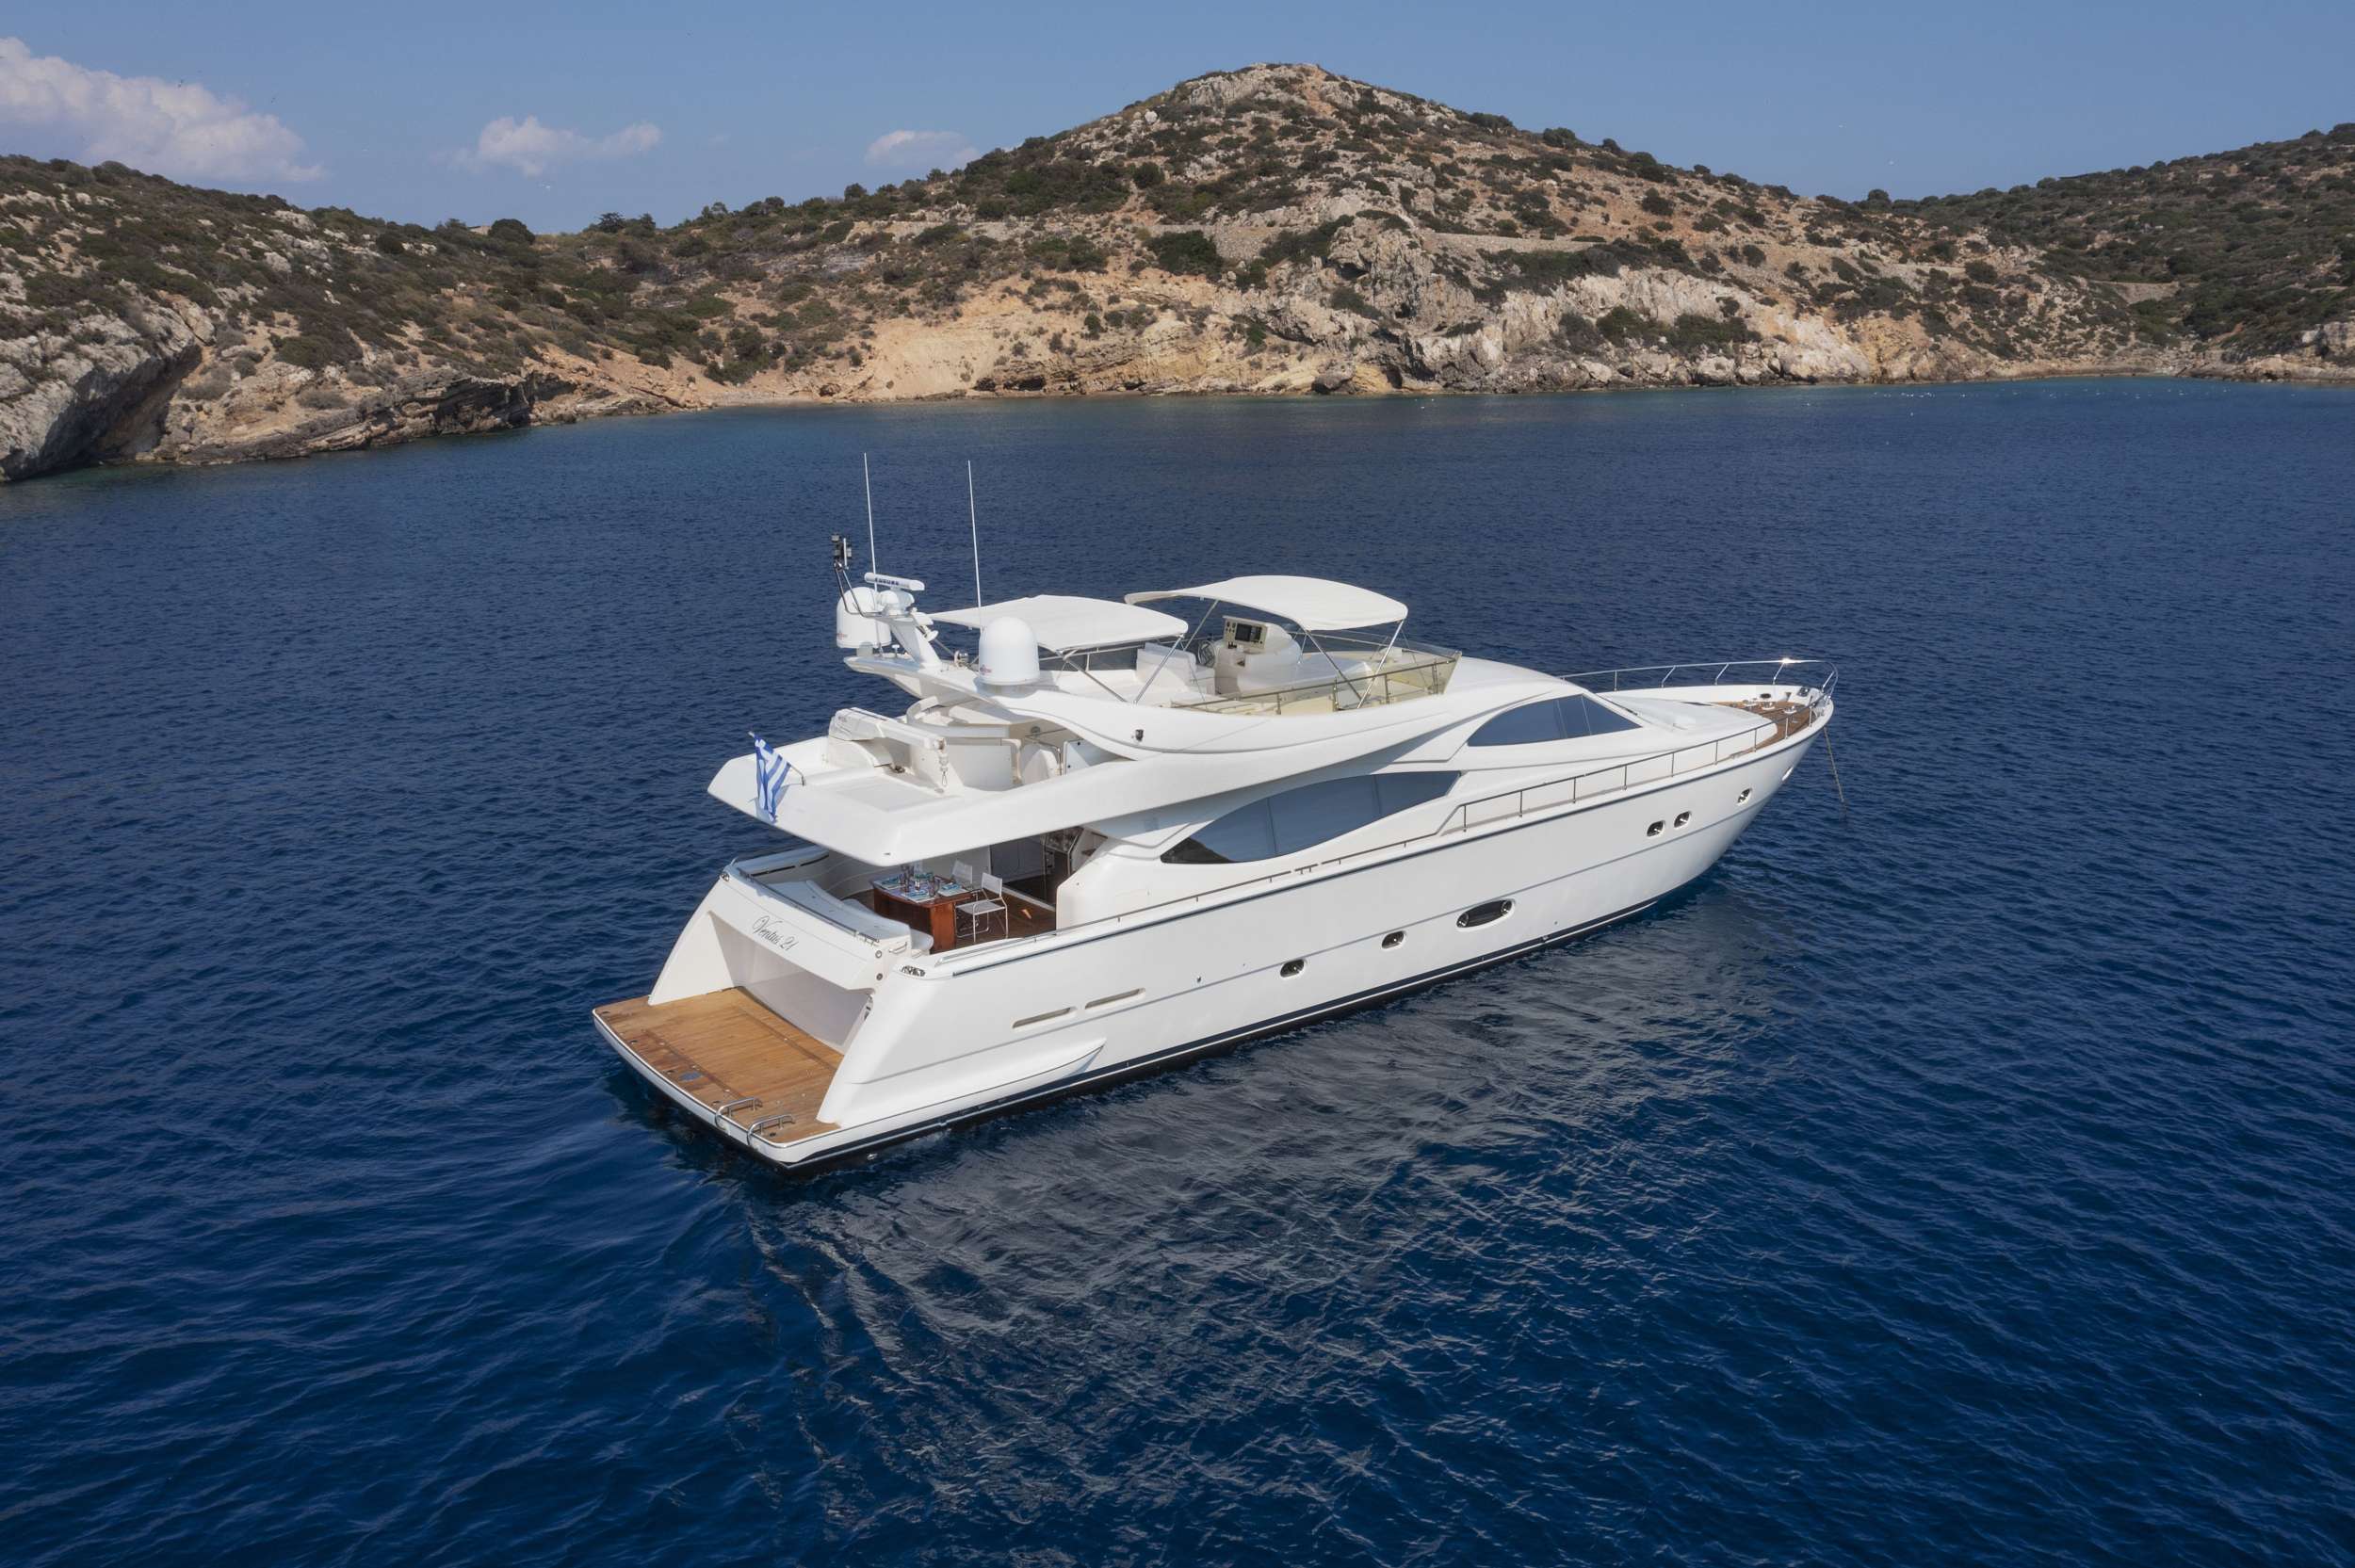 Ventus 21 - Yacht Charter Kavala & Boat hire in Greece 1